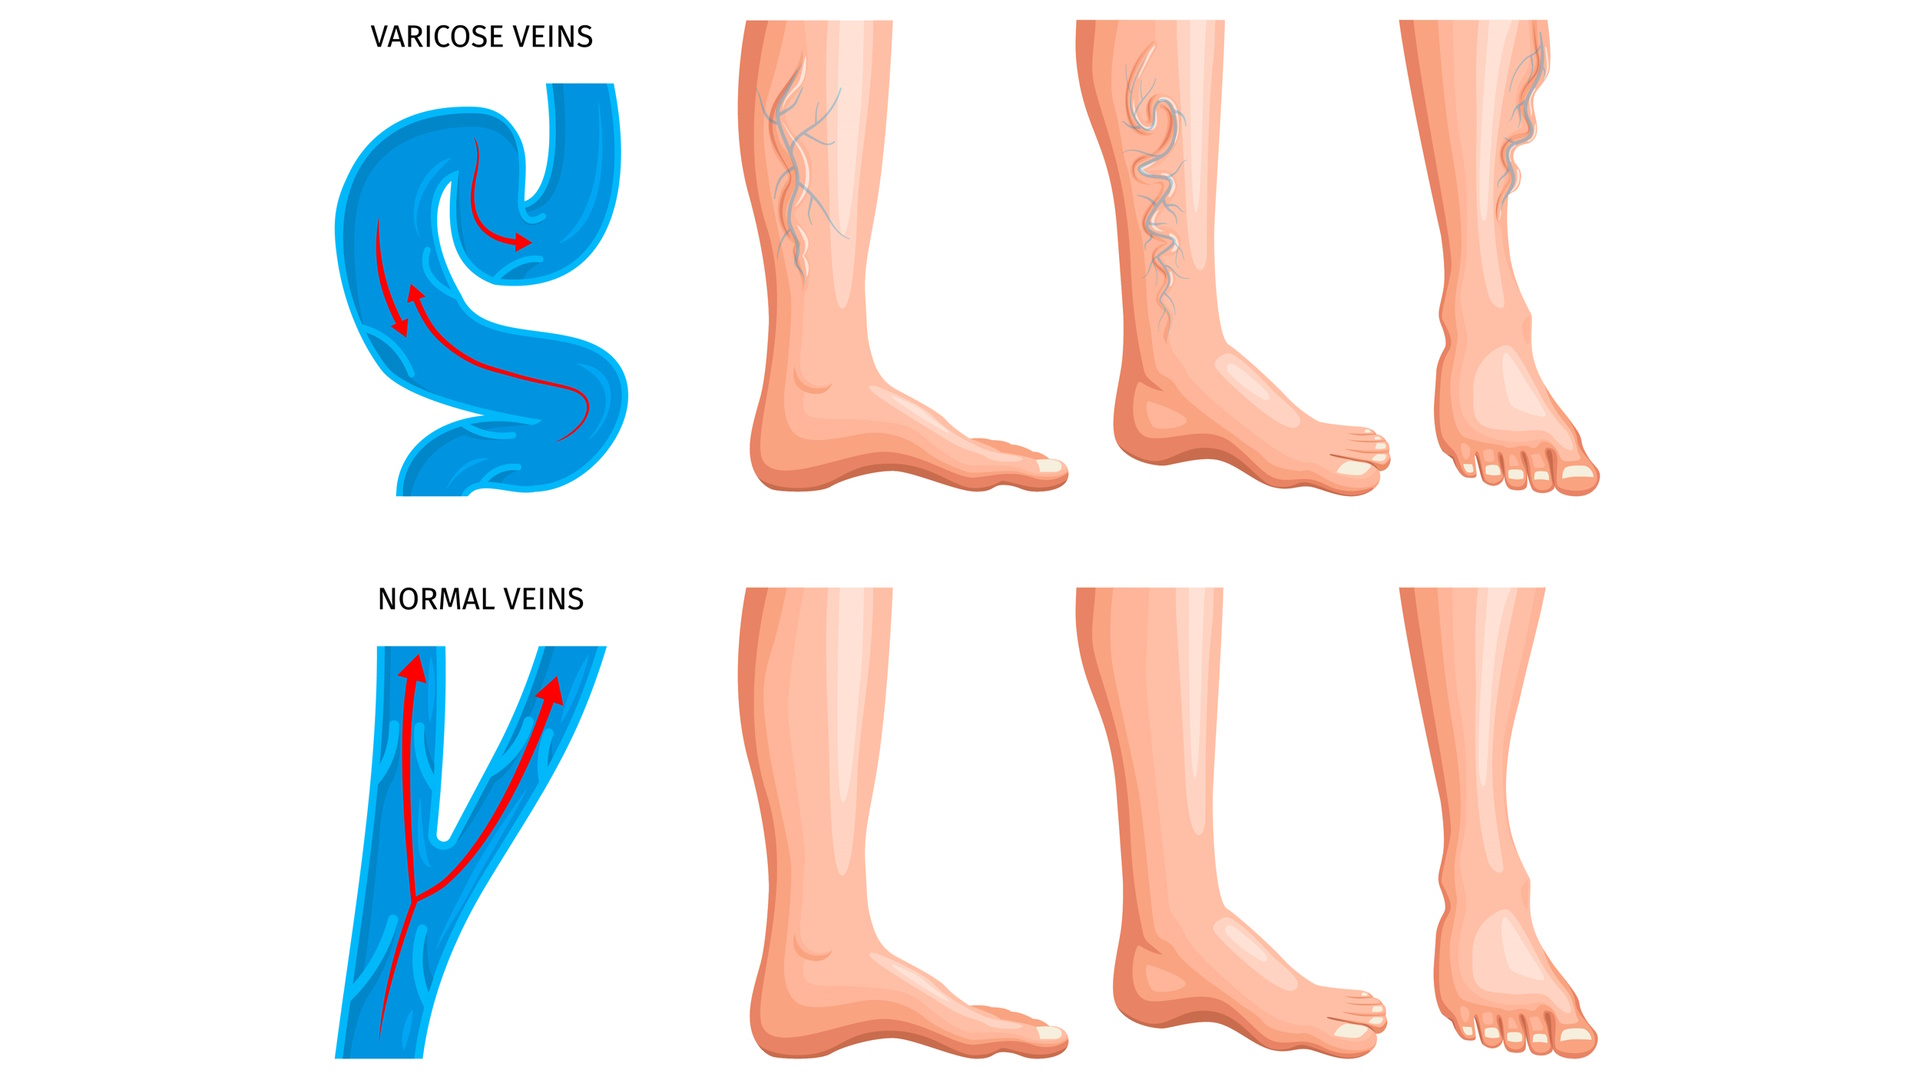 Varicose Veins: 7 Signs You Need to See a Vein Specialist